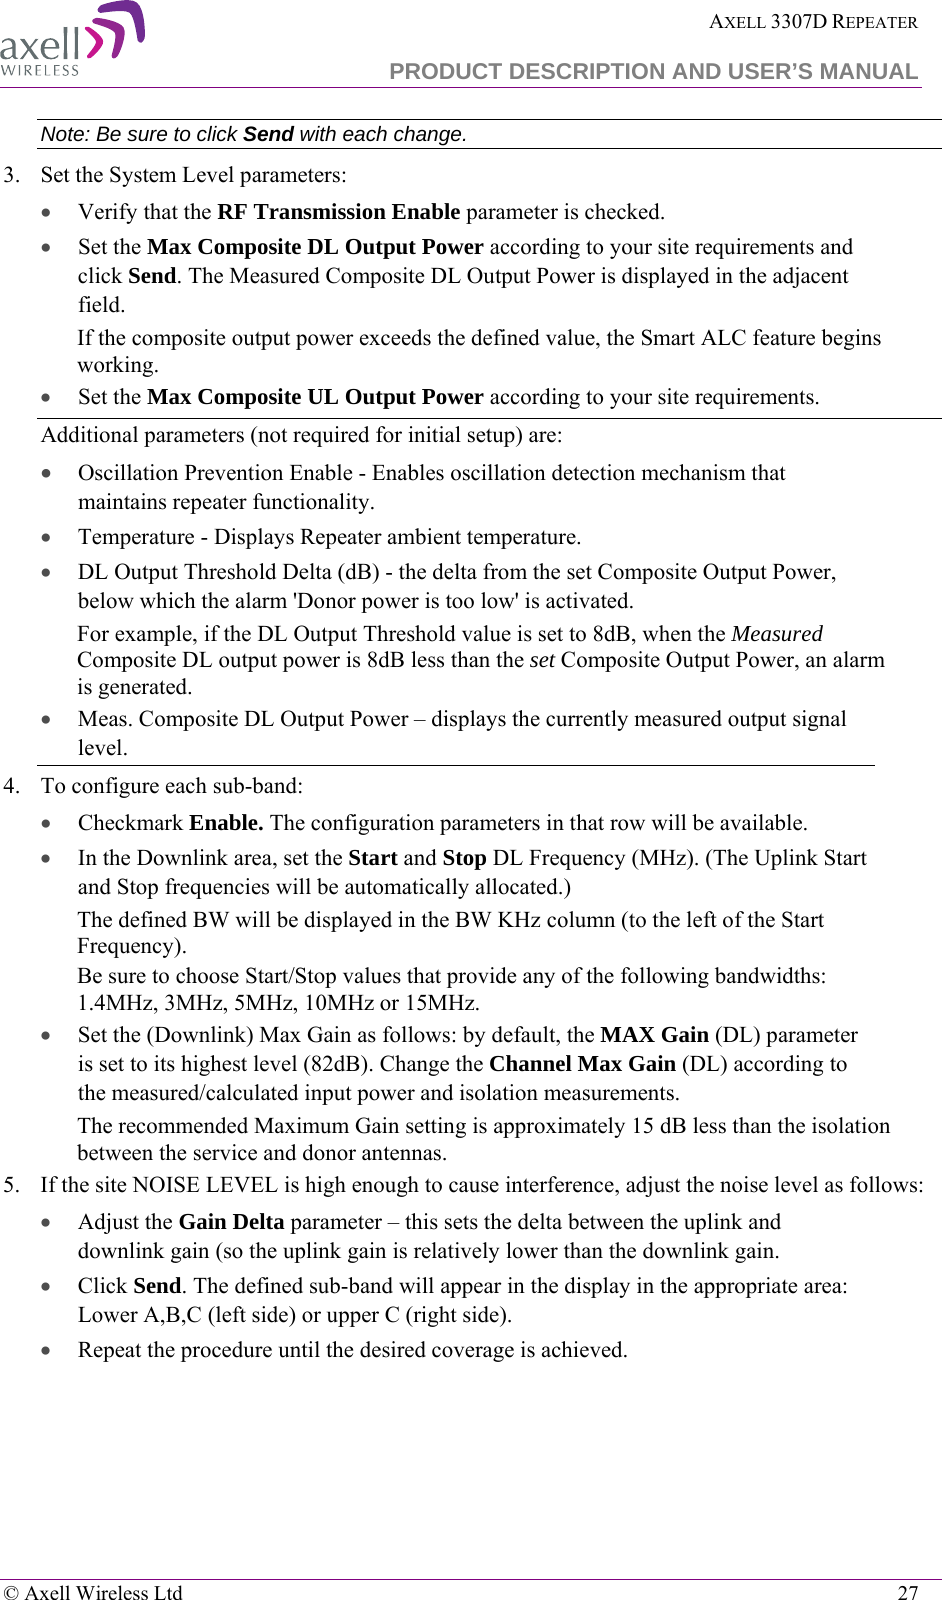  AXELL 3307D REPEATER  PRODUCT DESCRIPTION AND USER’S MANUAL   © Axell Wireless Ltd    27 Note: Be sure to click Send with each change. 3.  Set the System Level parameters: • Verify that the RF Transmission Enable parameter is checked.  •  Set the Max Composite DL Output Power according to your site requirements and click Send. The Measured Composite DL Output Power is displayed in the adjacent field.  If the composite output power exceeds the defined value, the Smart ALC feature begins working. •  Set the Max Composite UL Output Power according to your site requirements.  Additional parameters (not required for initial setup) are: • Oscillation Prevention Enable - Enables oscillation detection mechanism that maintains repeater functionality. • Temperature - Displays Repeater ambient temperature. • DL Output Threshold Delta (dB) - the delta from the set Composite Output Power, below which the alarm &apos;Donor power is too low&apos; is activated.  For example, if the DL Output Threshold value is set to 8dB, when the Measured Composite DL output power is 8dB less than the set Composite Output Power, an alarm is generated. • Meas. Composite DL Output Power – displays the currently measured output signal level. 4.  To configure each sub-band:  • Checkmark Enable. The configuration parameters in that row will be available. • In the Downlink area, set the Start and Stop DL Frequency (MHz). (The Uplink Start and Stop frequencies will be automatically allocated.) The defined BW will be displayed in the BW KHz column (to the left of the Start Frequency). Be sure to choose Start/Stop values that provide any of the following bandwidths: 1.4MHz, 3MHz, 5MHz, 10MHz or 15MHz.  • Set the (Downlink) Max Gain as follows: by default, the MAX Gain (DL) parameter is set to its highest level (82dB). Change the Channel Max Gain (DL) according to the measured/calculated input power and isolation measurements.  The recommended Maximum Gain setting is approximately 15 dB less than the isolation between the service and donor antennas.  5.  If the site NOISE LEVEL is high enough to cause interference, adjust the noise level as follows: • Adjust the Gain Delta parameter – this sets the delta between the uplink and downlink gain (so the uplink gain is relatively lower than the downlink gain. • Click Send. The defined sub-band will appear in the display in the appropriate area: Lower A,B,C (left side) or upper C (right side). • Repeat the procedure until the desired coverage is achieved. 